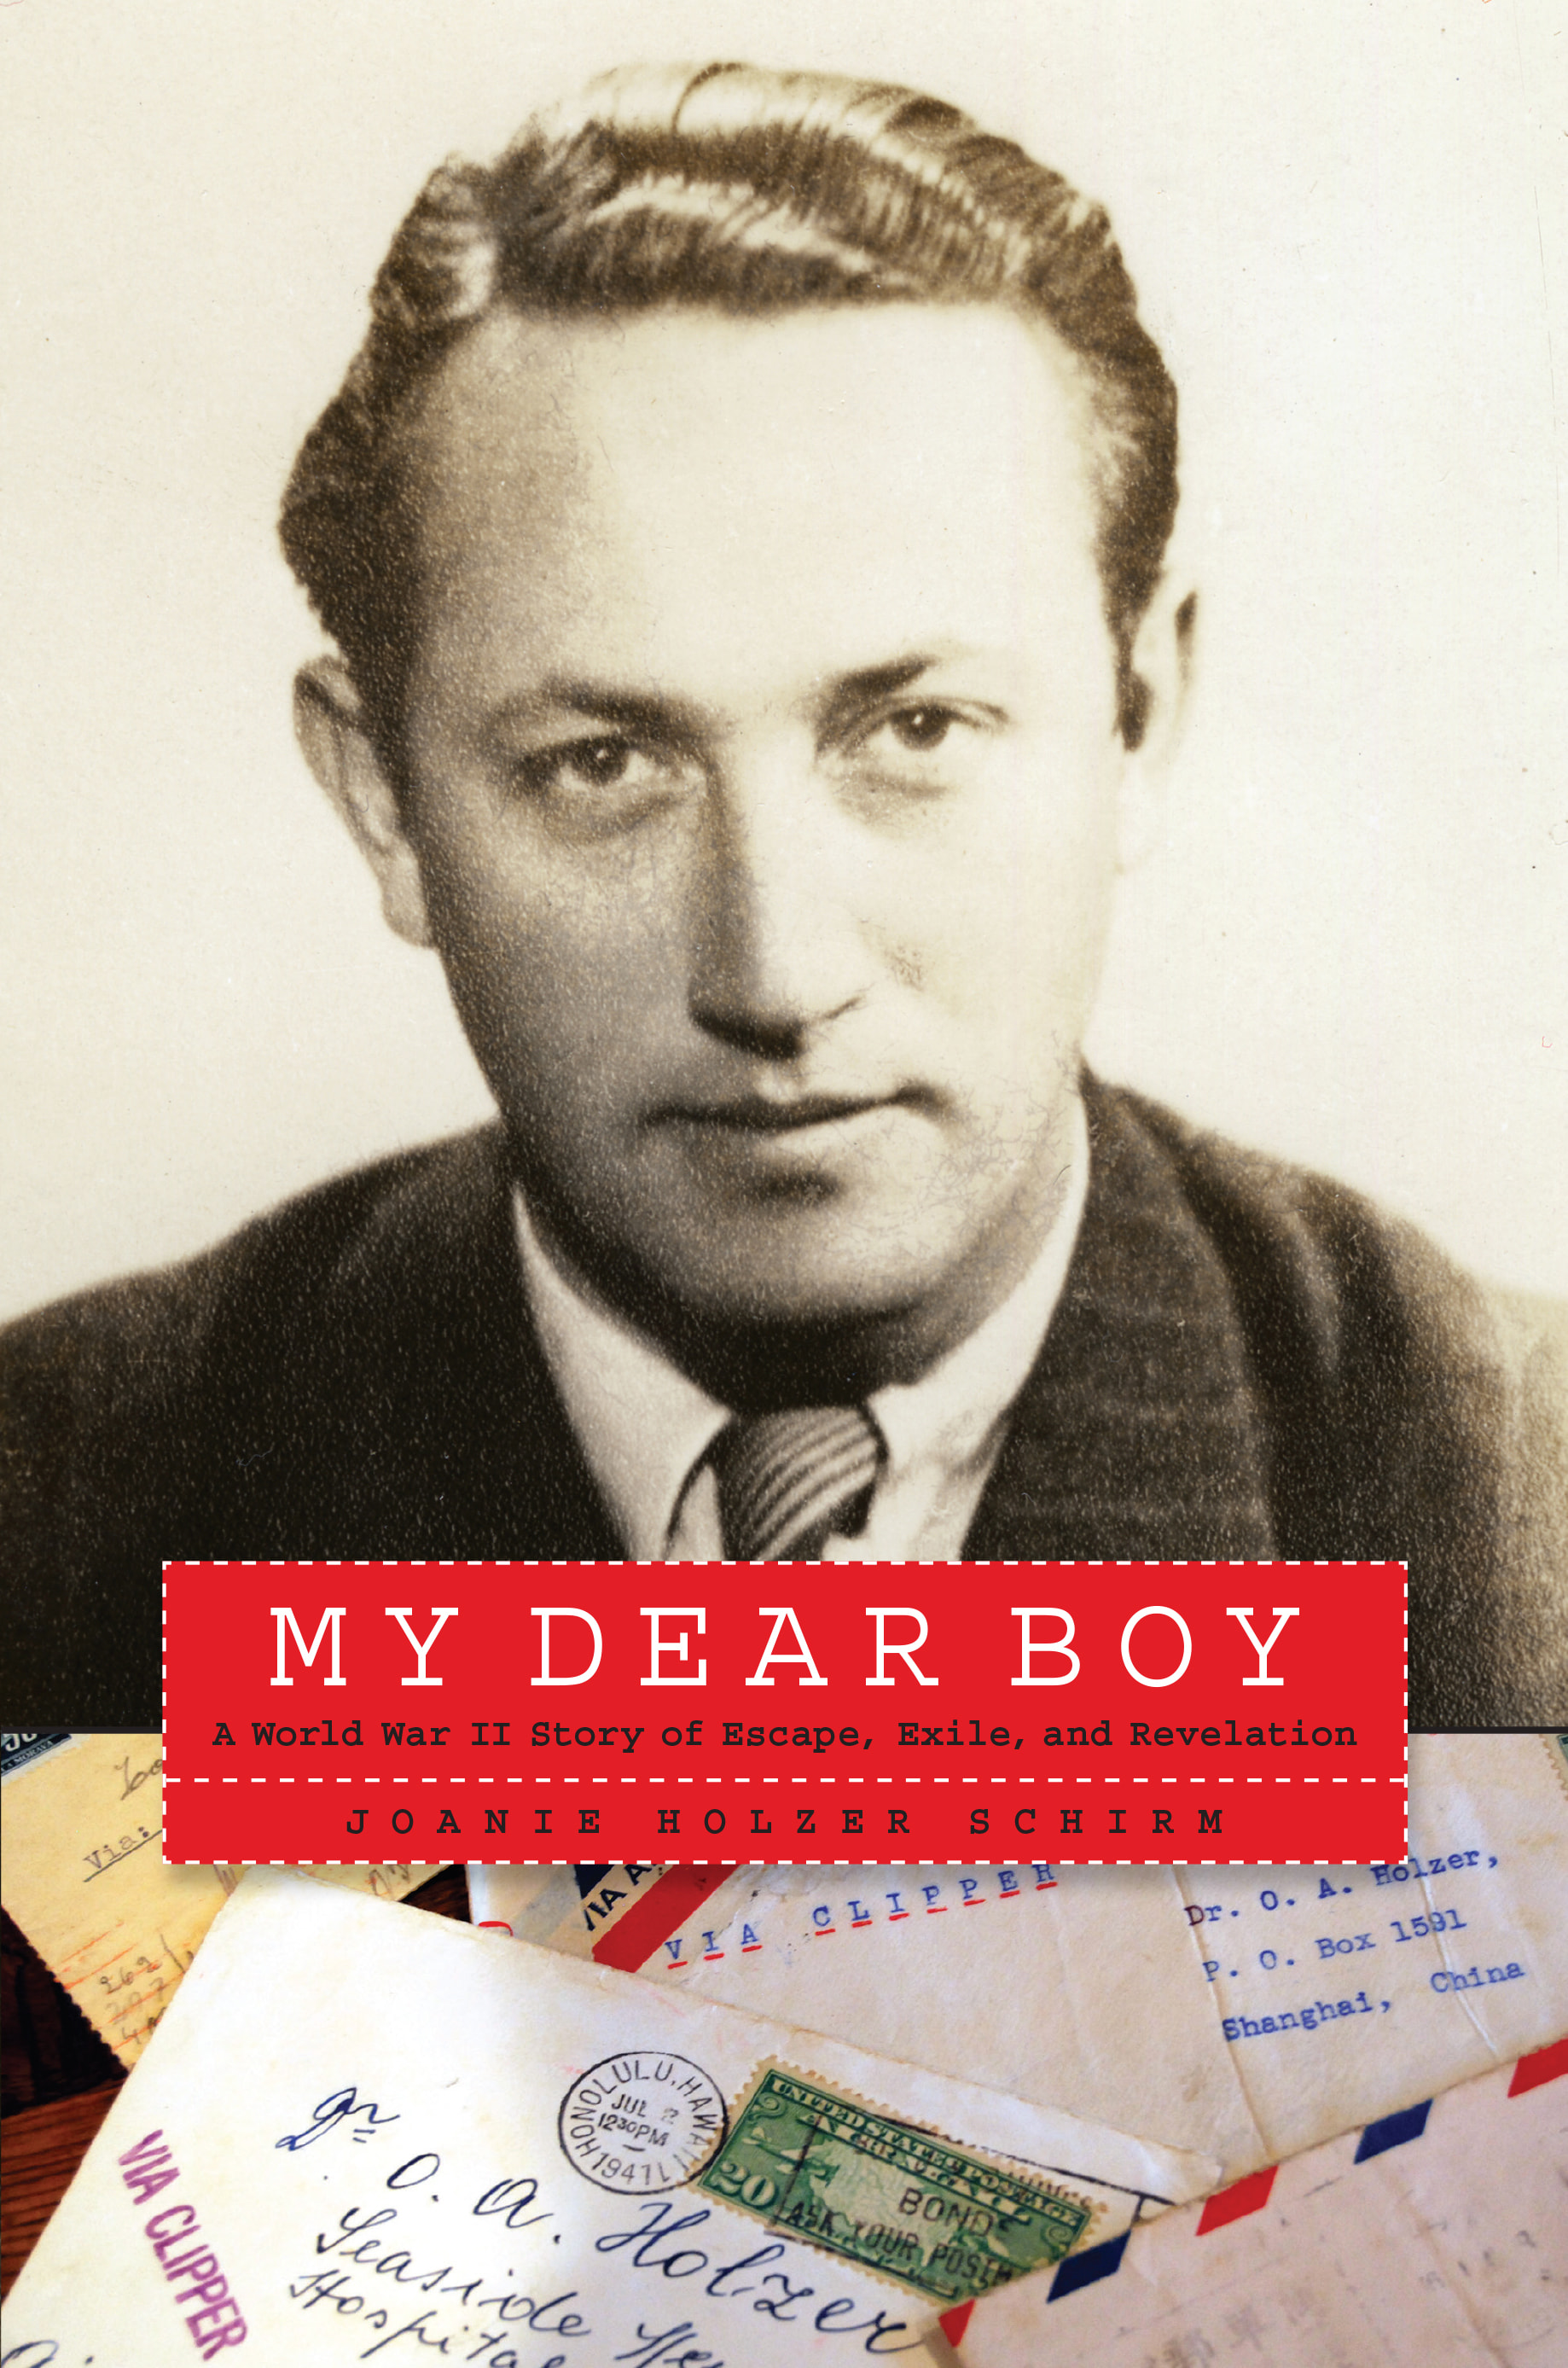 MY DEAR BOY: A World War II Story of Escape, Exile, and Revelation